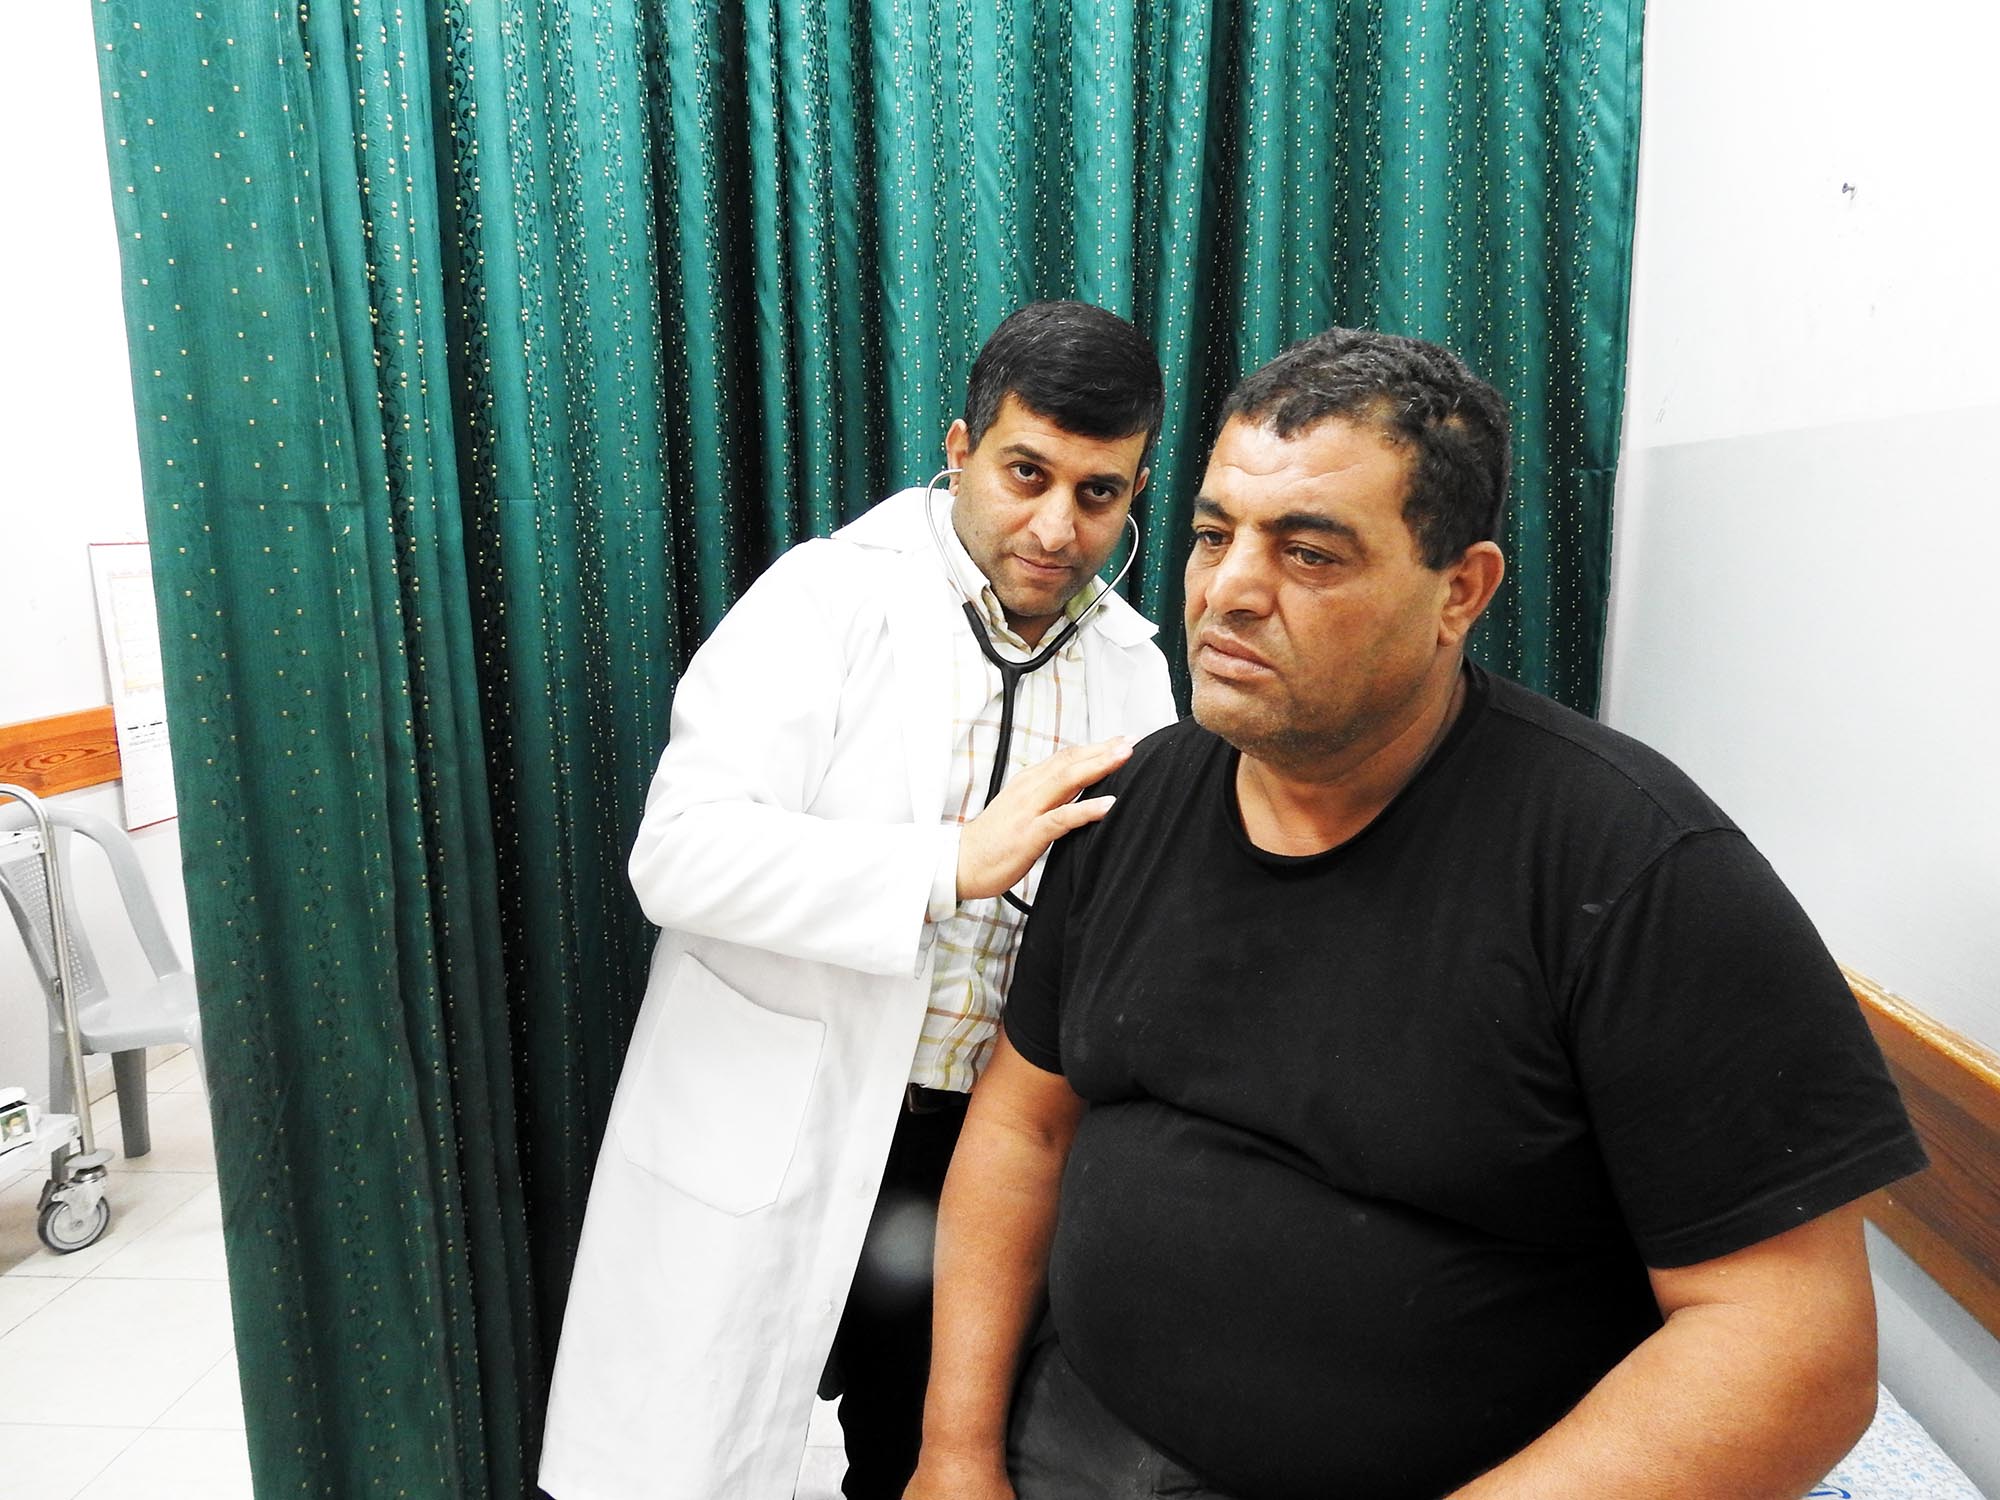 Wajih is a patient at the at Palestine Red Crescent Society (PRCS) medical clinic in Idhna.